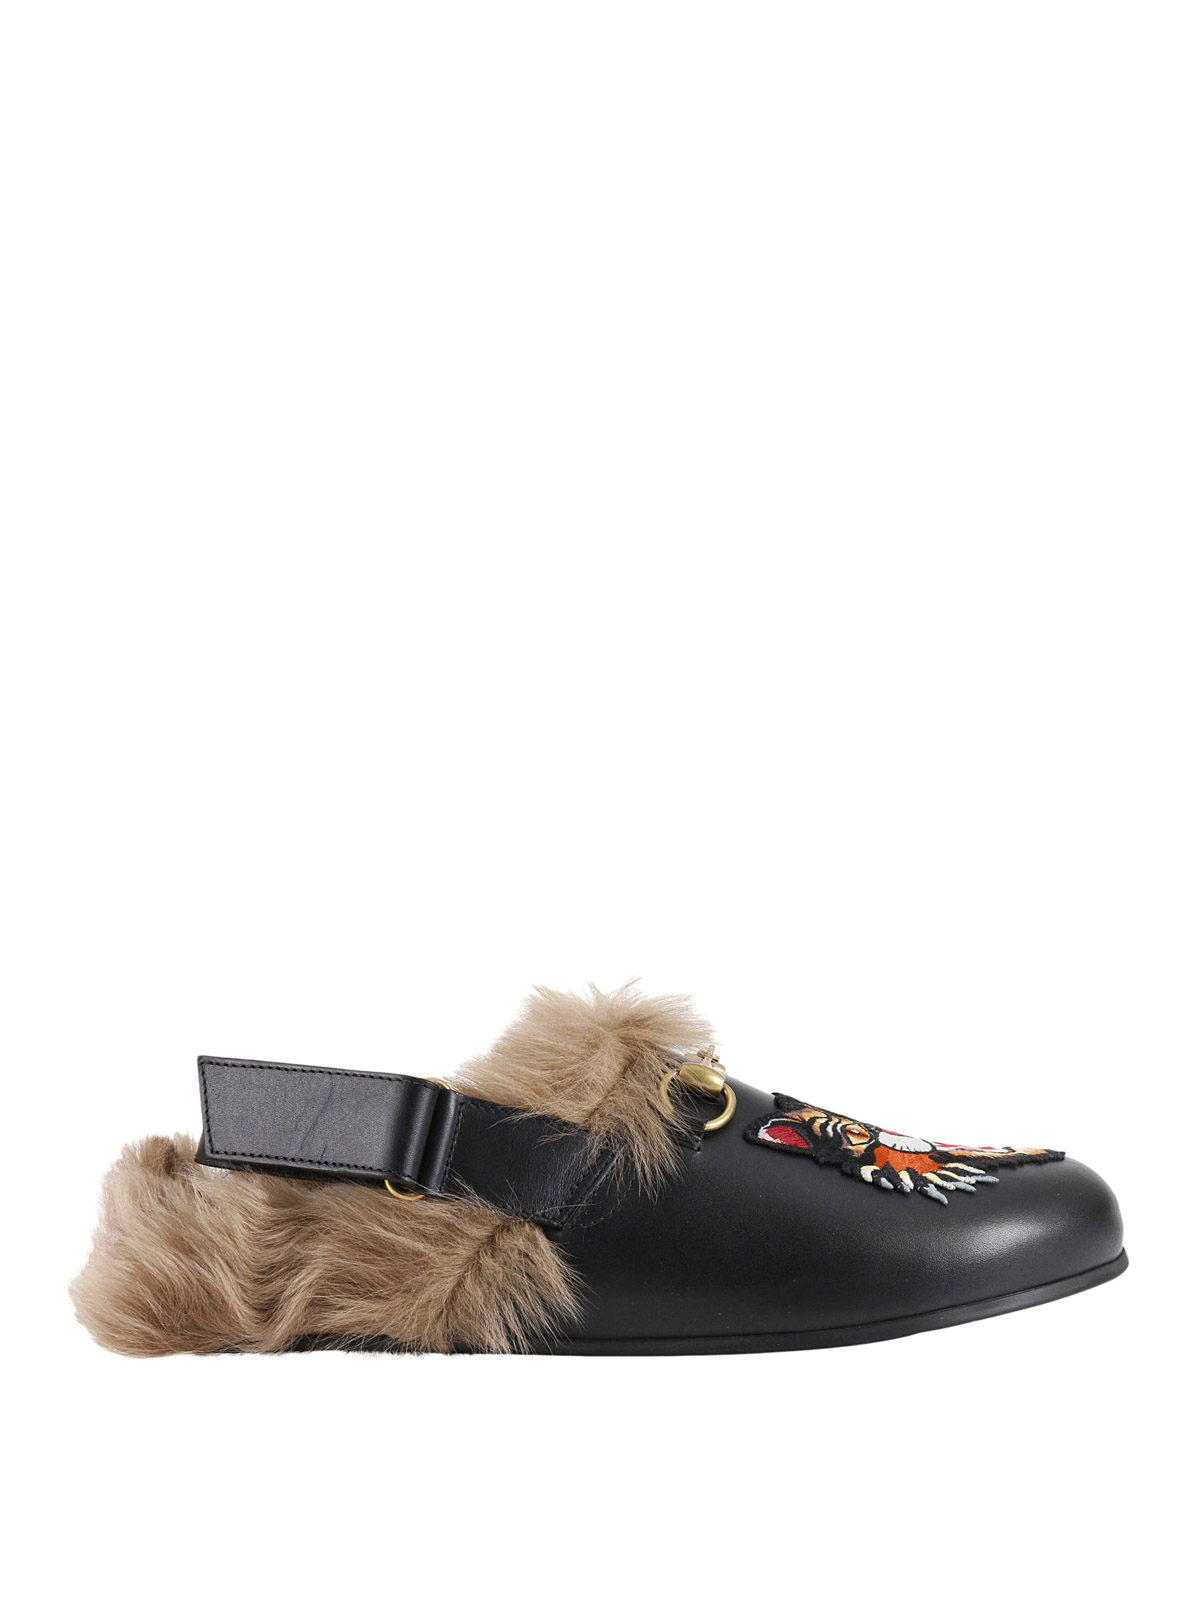 gesture semester Word Mules shoes Gucci - Angry cat fur trim leather slippers - 473494DS9101076